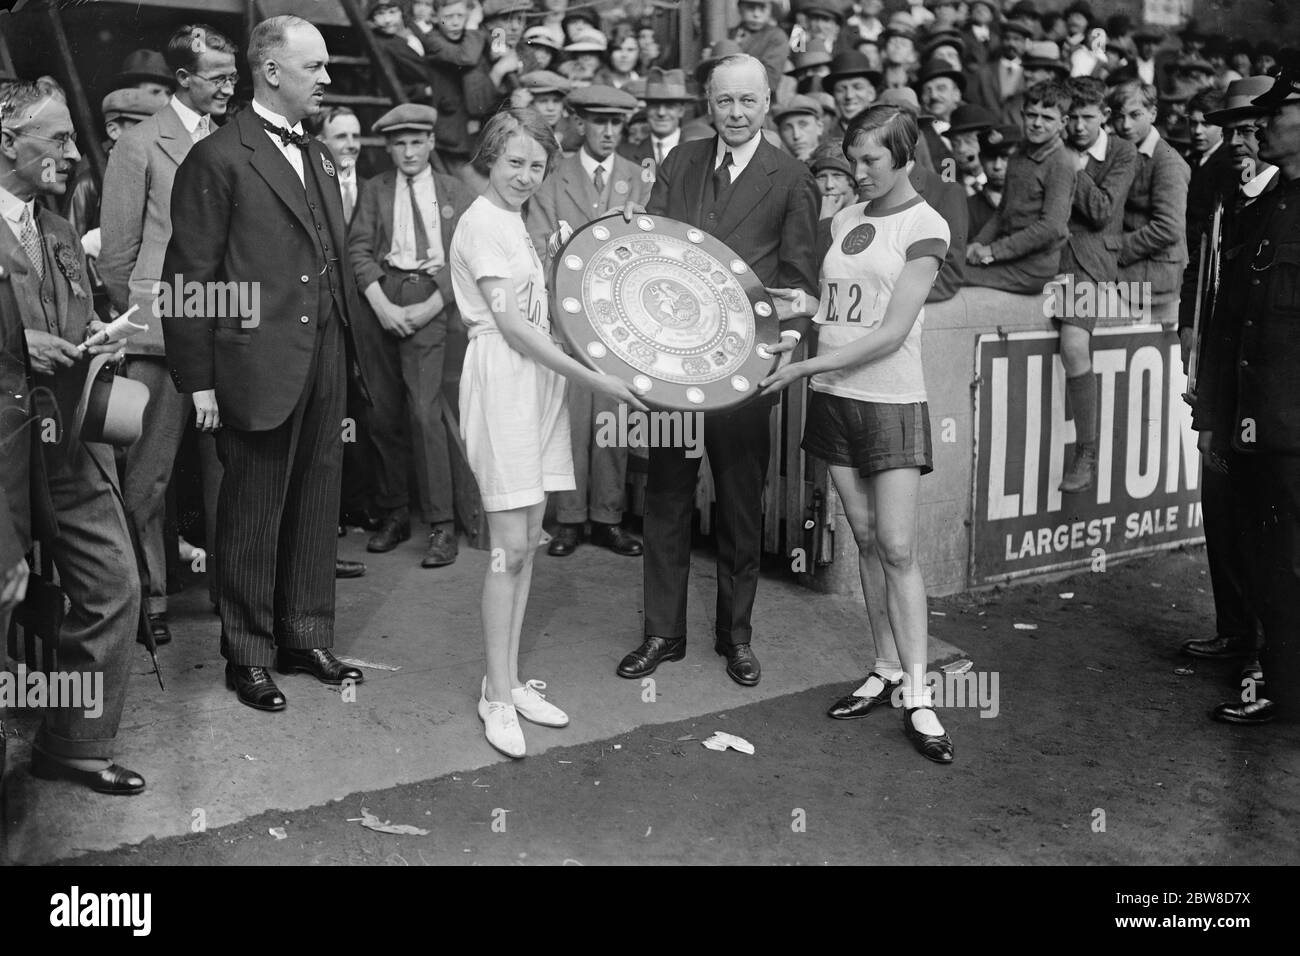 Junior inter-county athletic championships at Stamford Bridge . Sir W Joynson Hicks presenting the Shield to the representatives of London and Essex who tied for the championship . 16 July 1927 Stock Photo